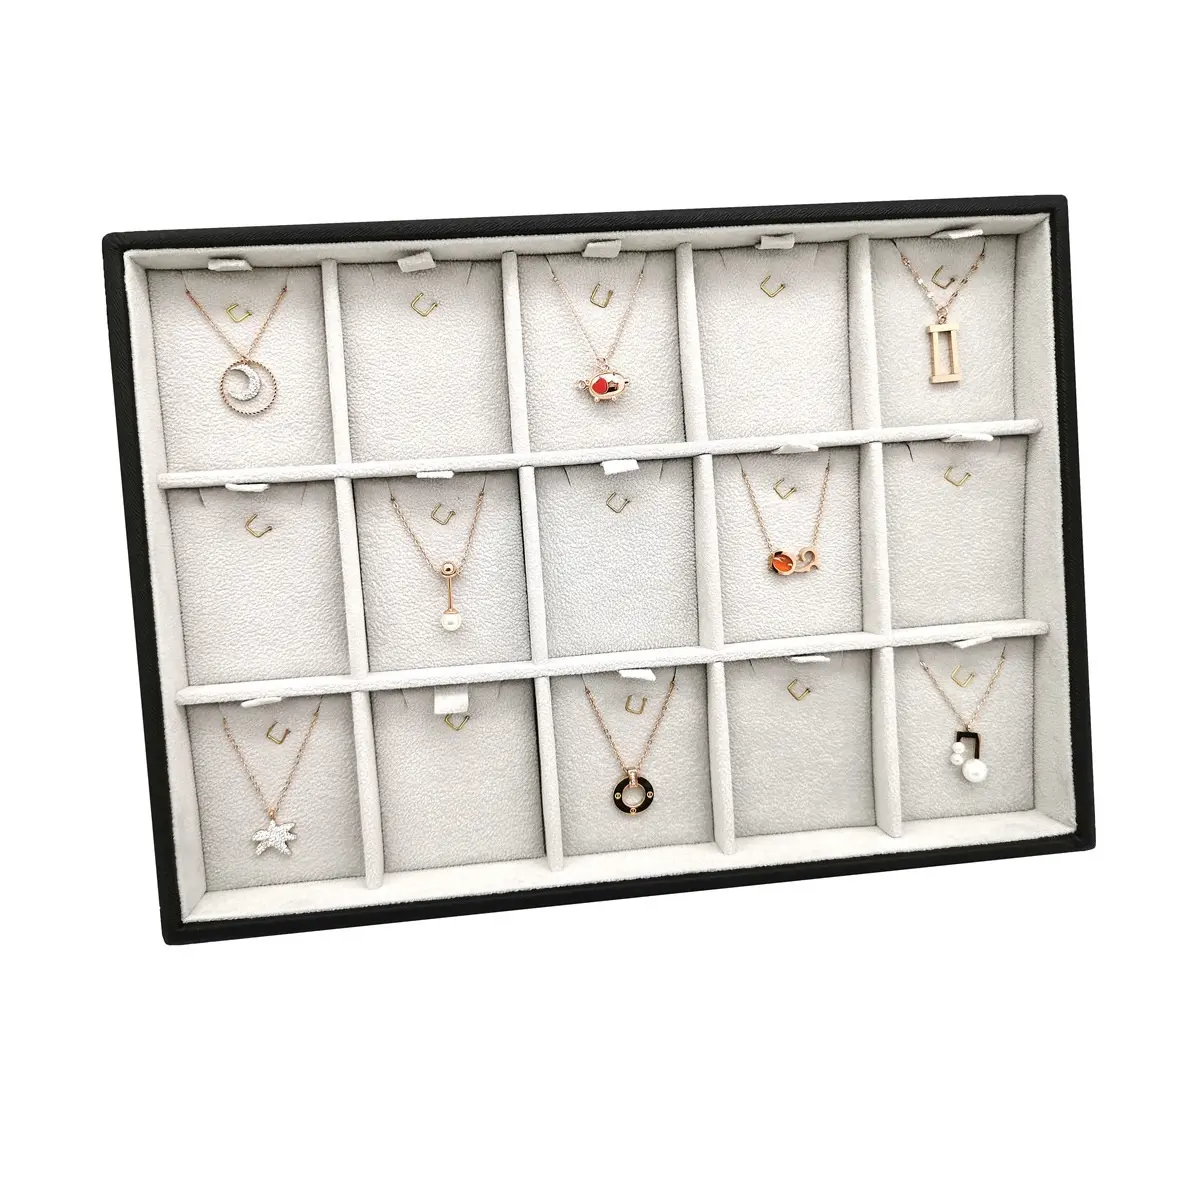 Necklace Display Lightly Wood Jewelry Display Trays For Pendant Necklace Stackable Jewelry Trays Easy Carry For Show Window JewelryDisplay